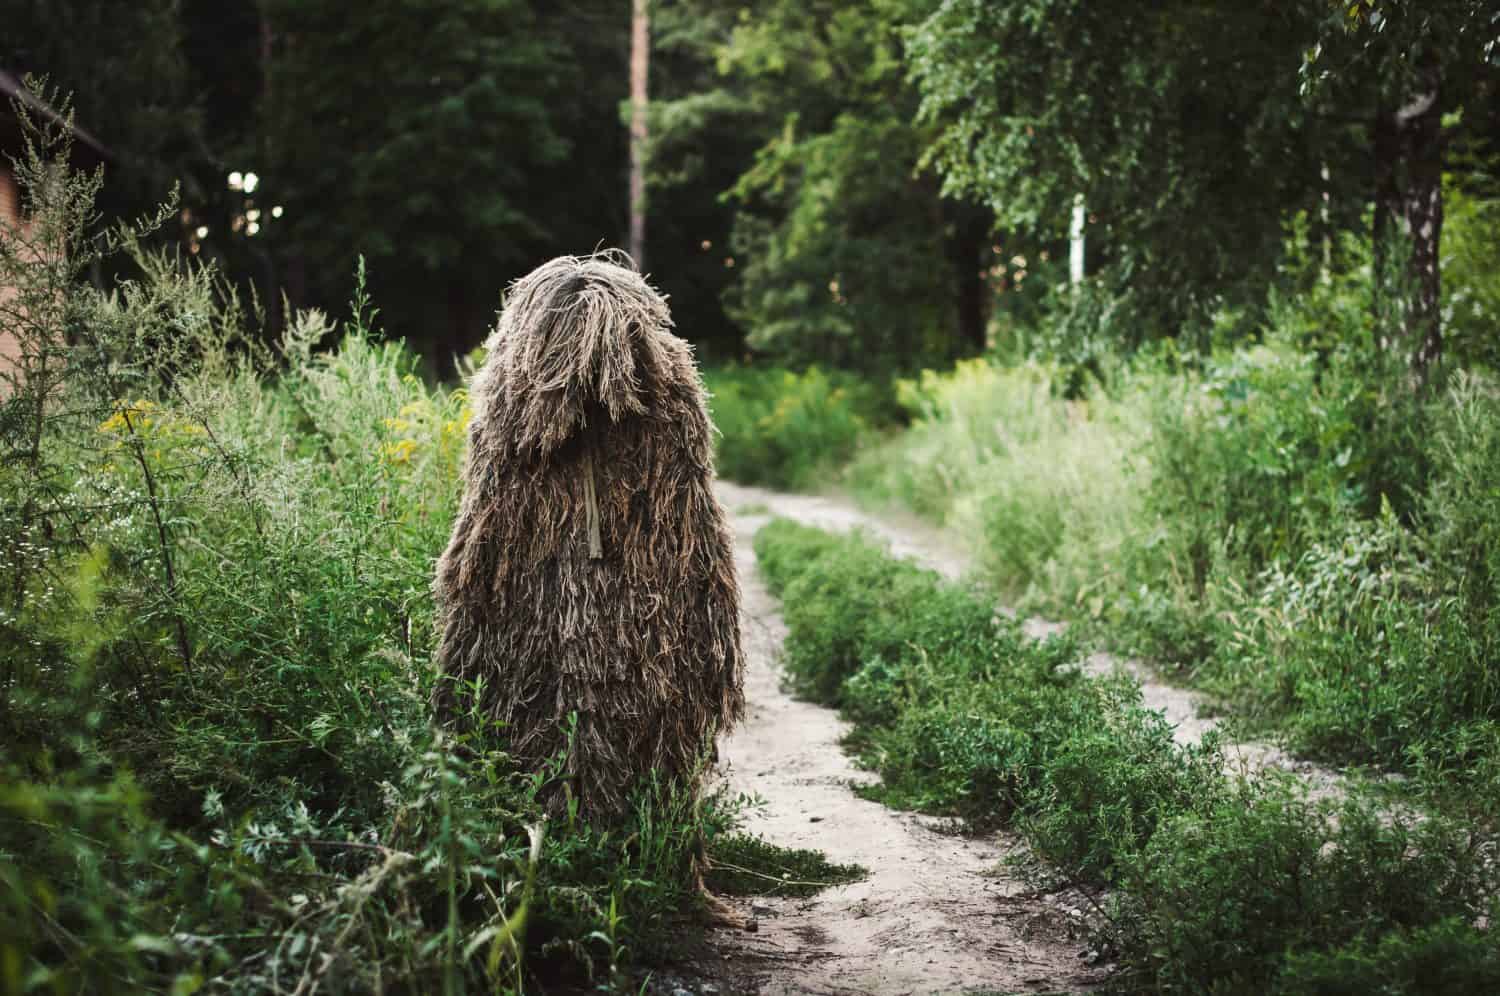 Indiana cryptids - Special camouflage ghillie suit for snipers and intelligence agents.